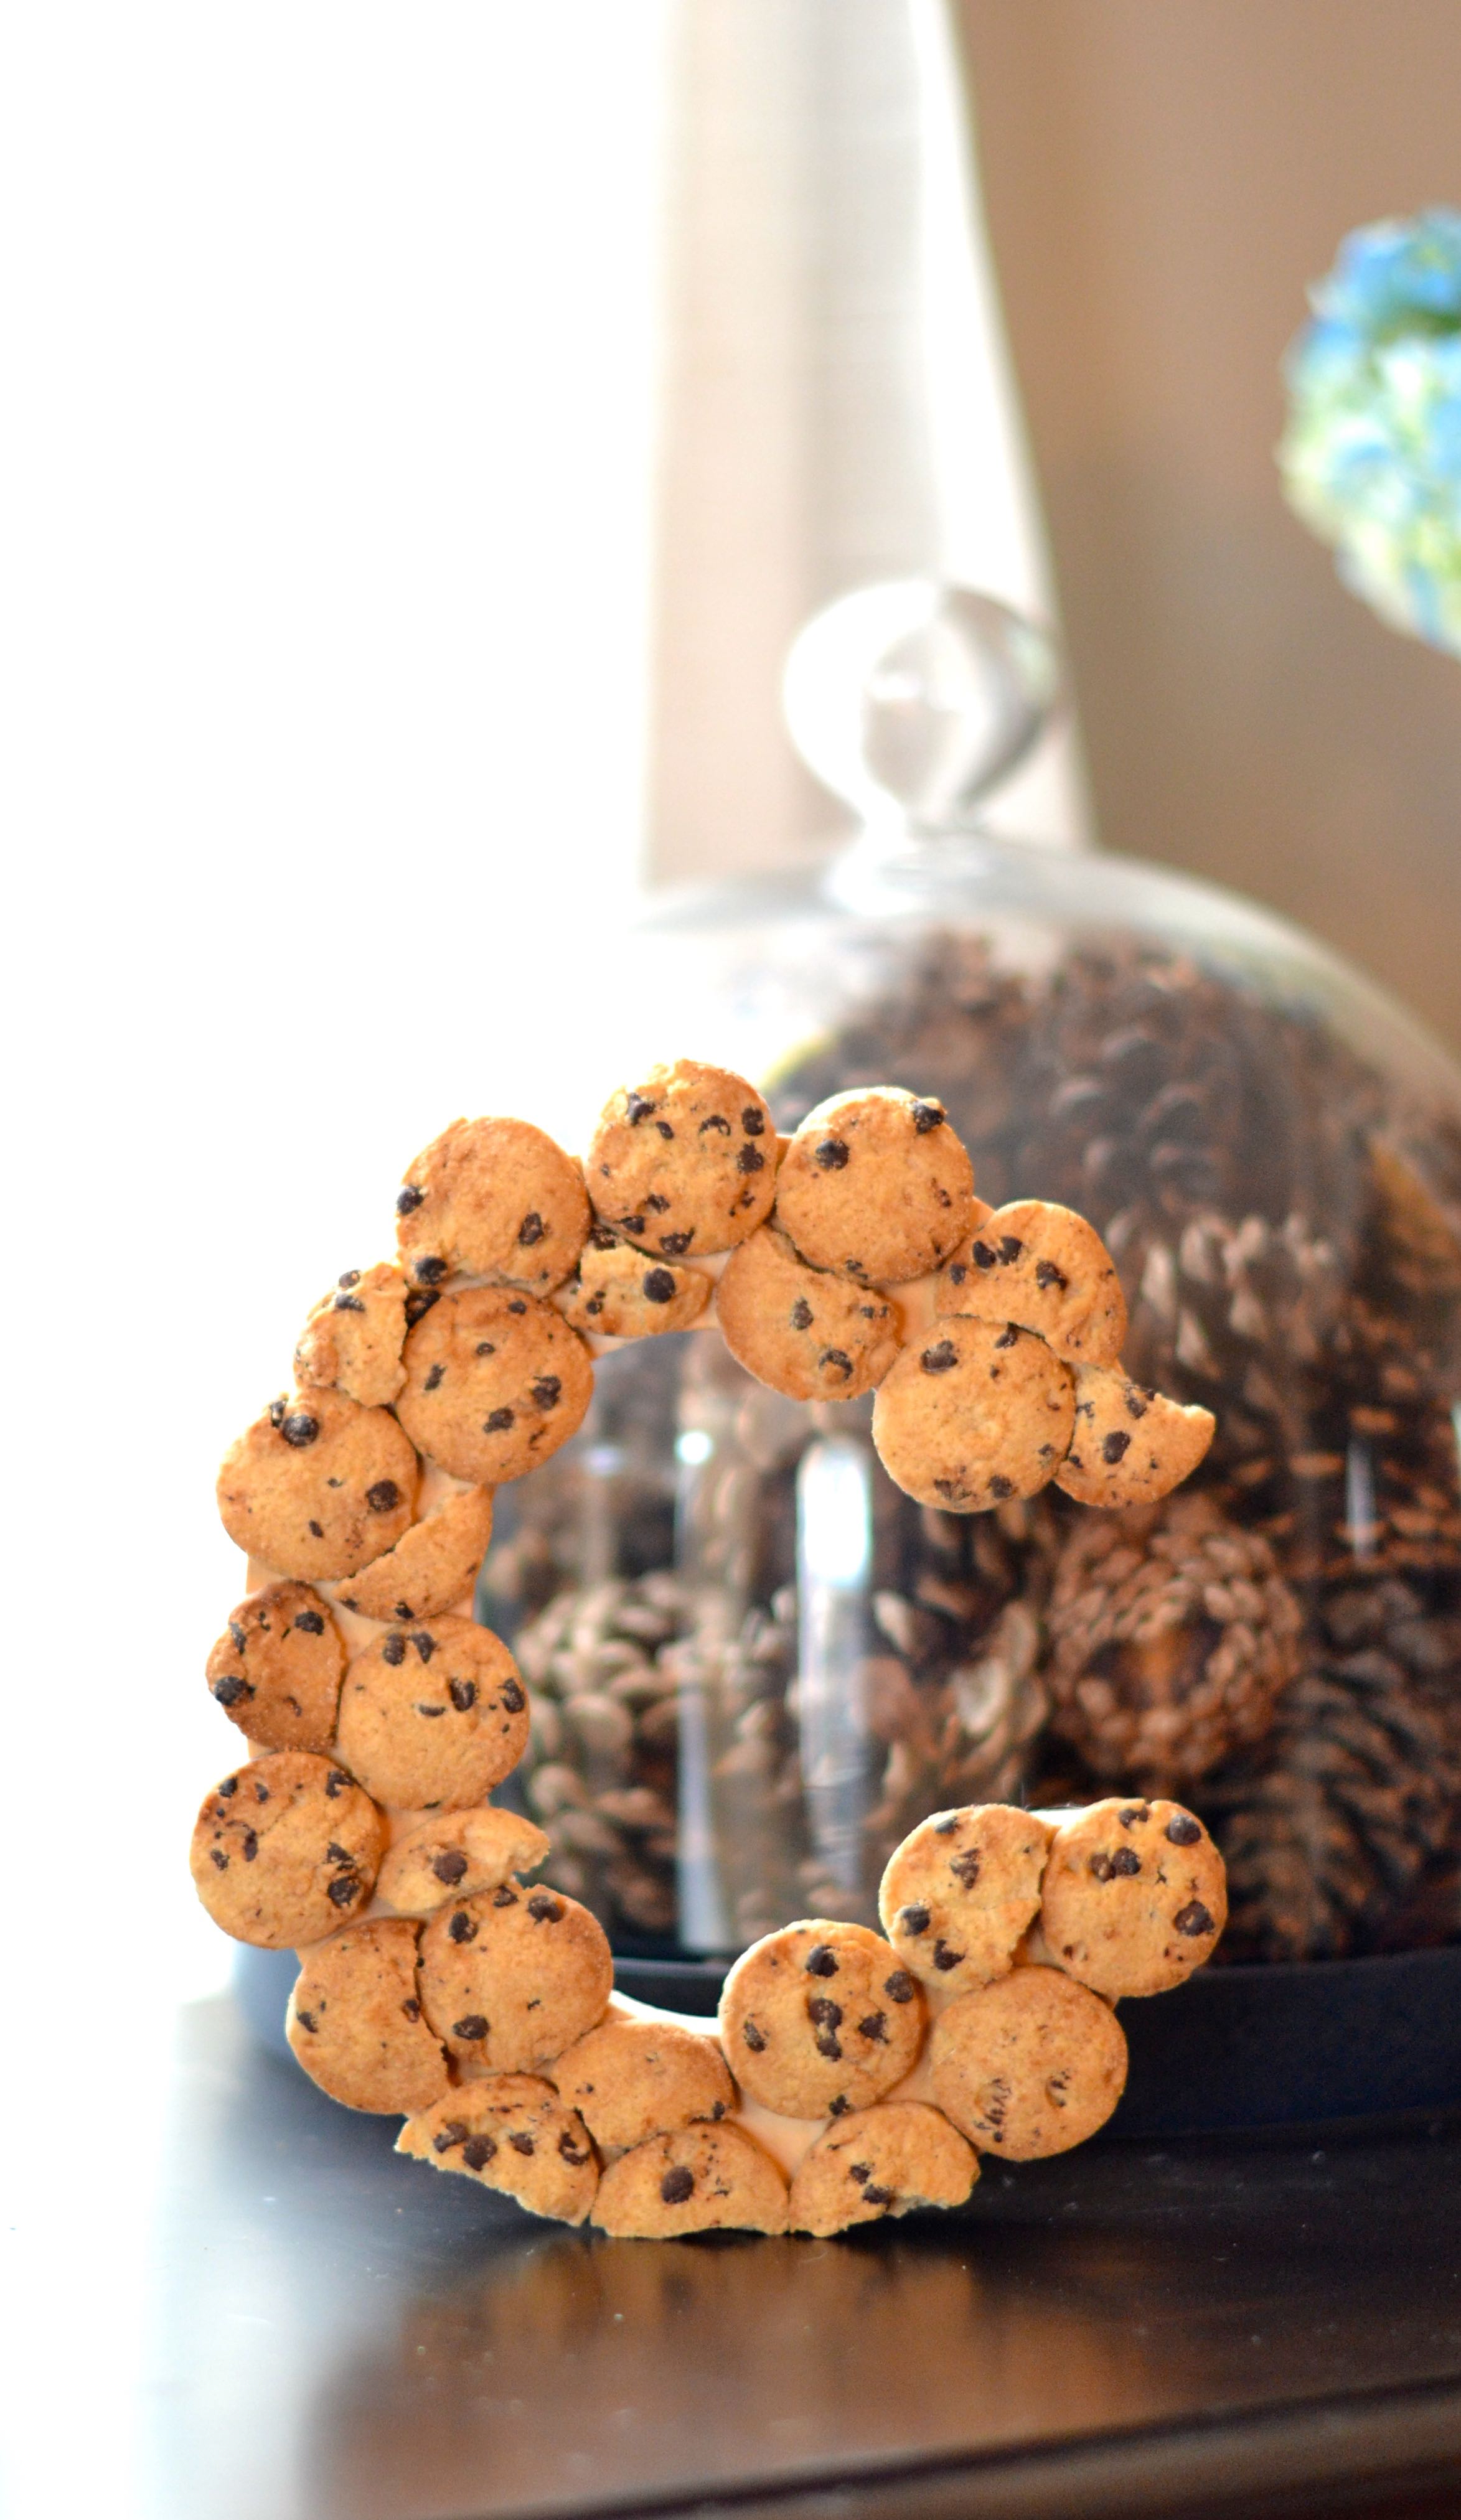 Milk & Cookie Party Ideas by Lindi Haws of Love The Day